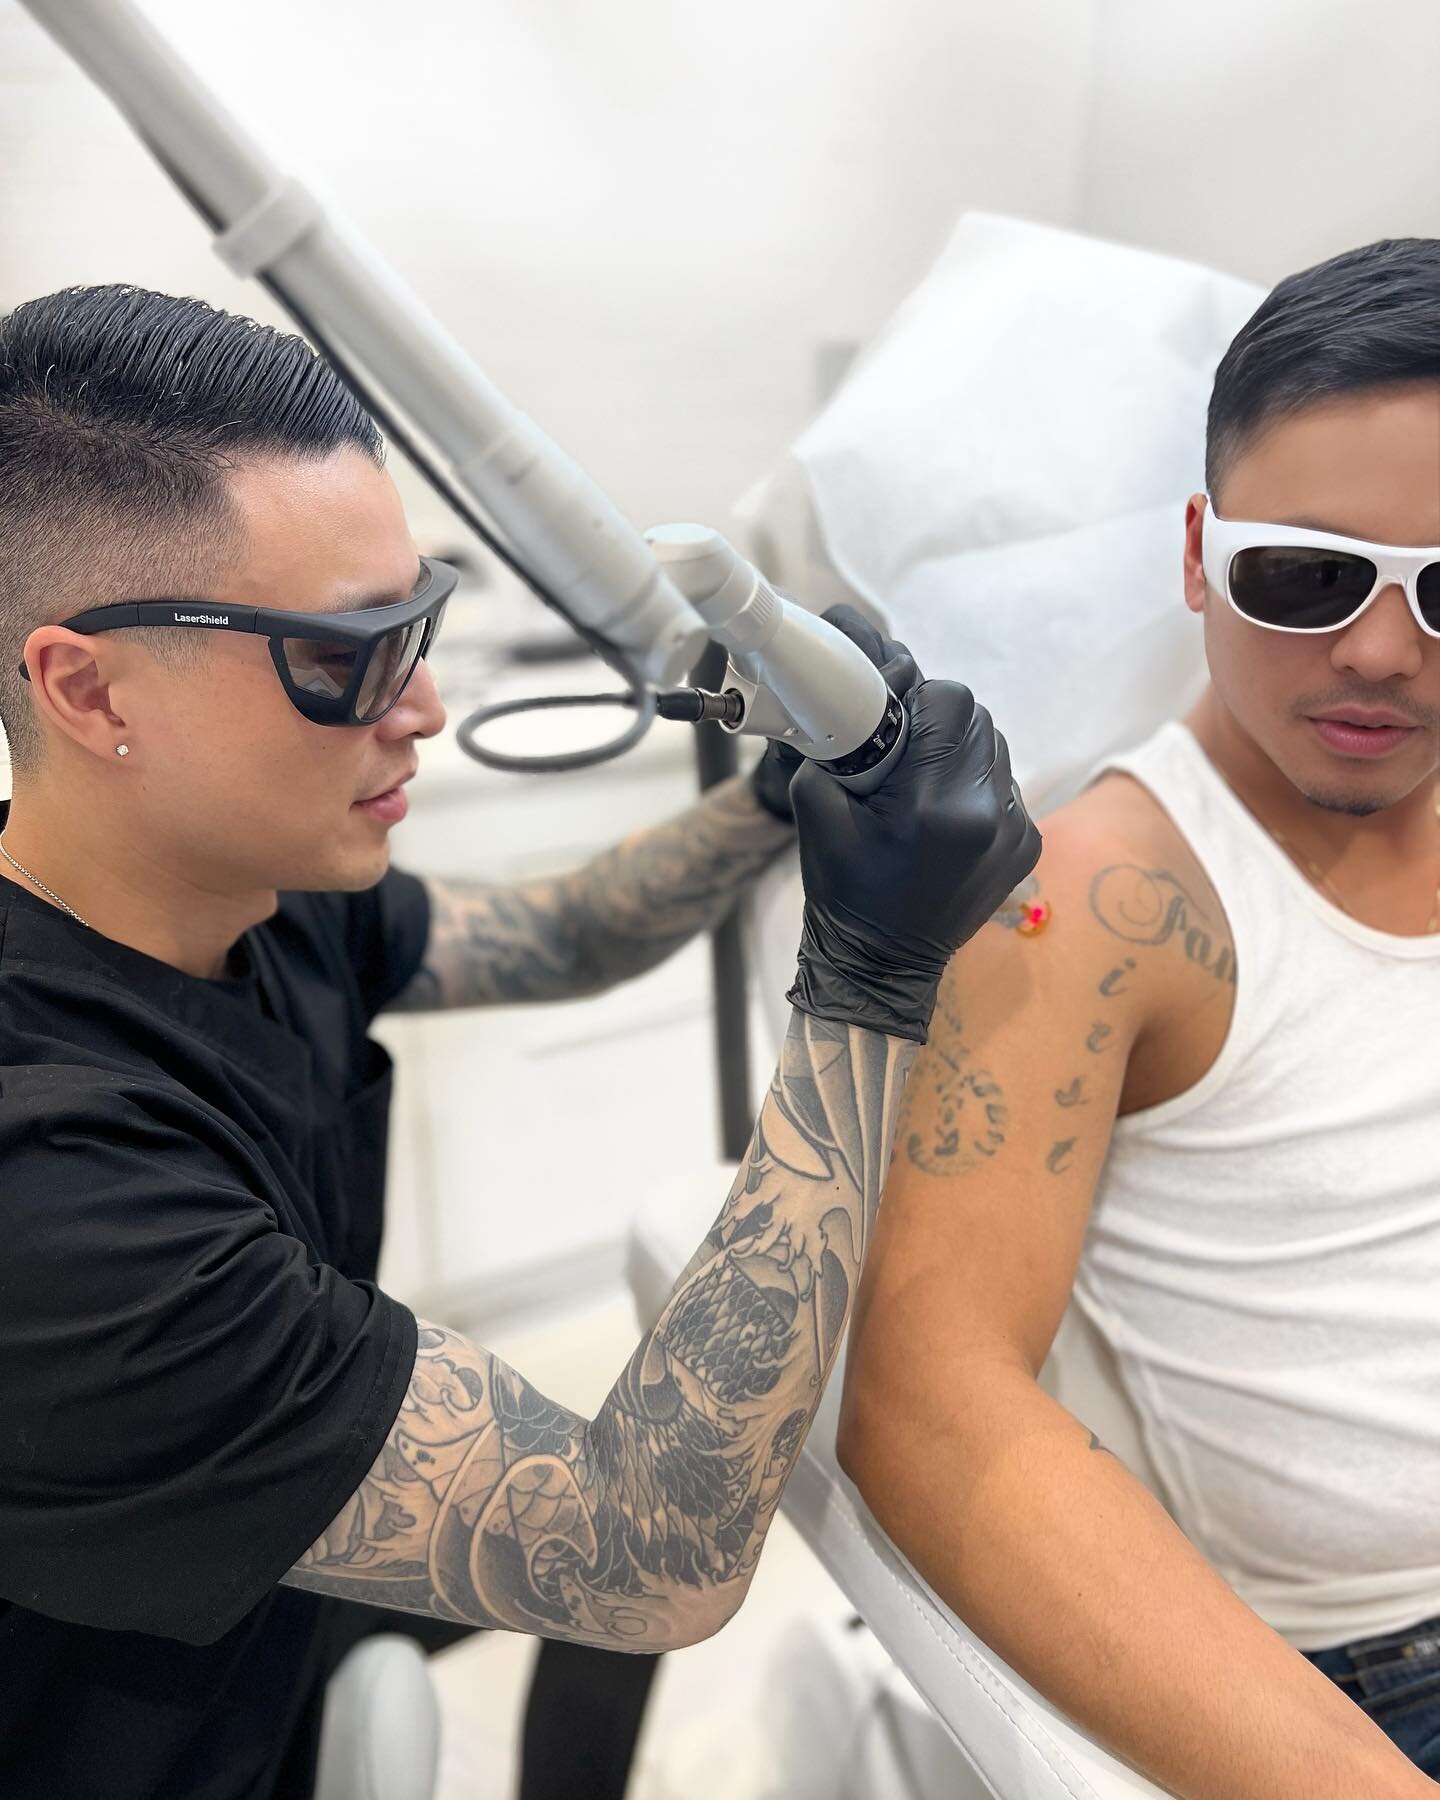 We are a local results-driven clinic in Edmonton dedicated to helping clients feel confident in their skin again.

We focus on Tattoo Removal, Permanent Makeup Removal and Skin Rejuvenation using the PicoWay laser.

Our flat rate pricing helps make r